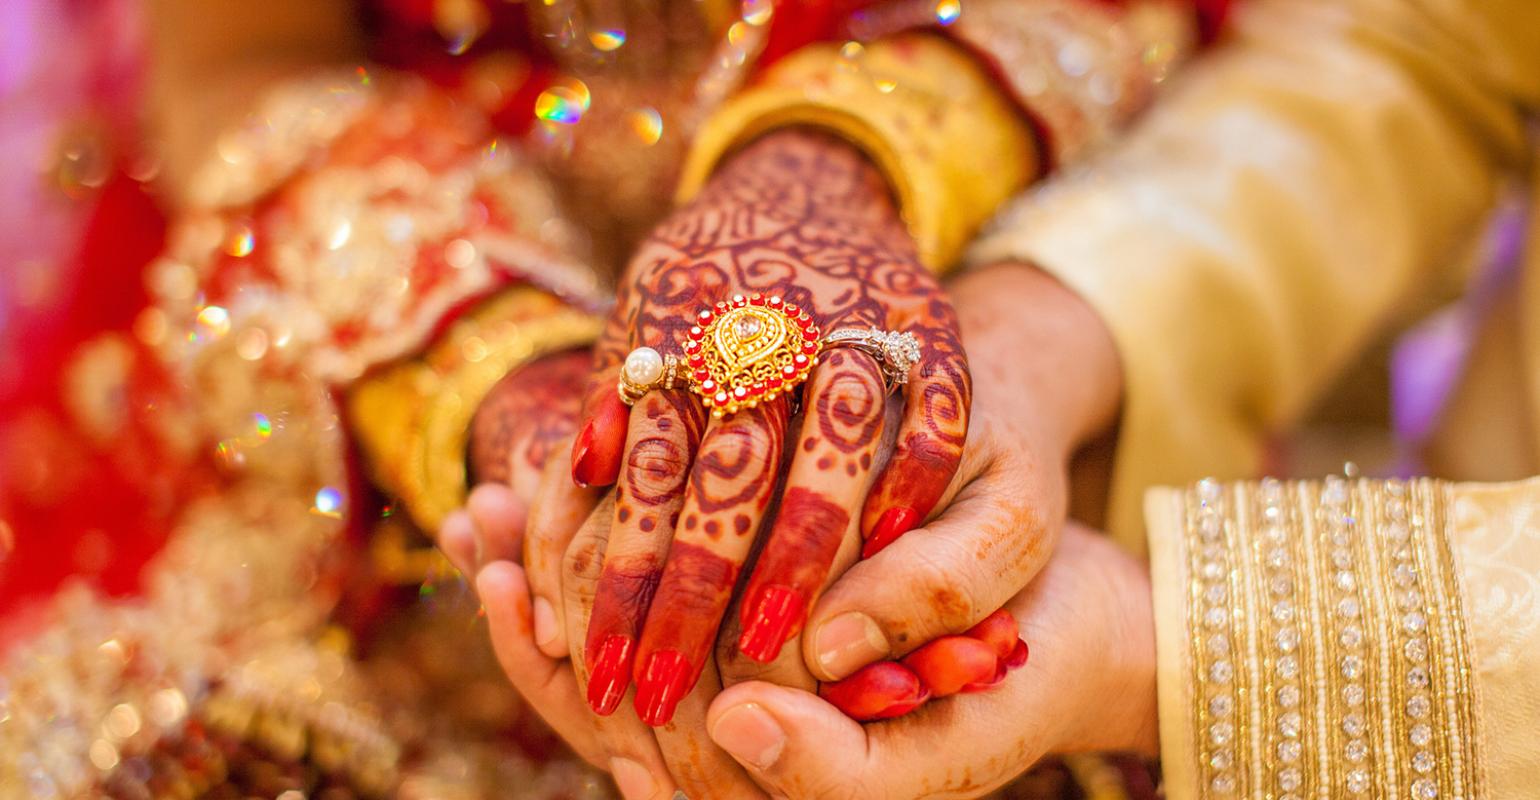 Indian Weddings Grow Ever More Lavish | Special Events